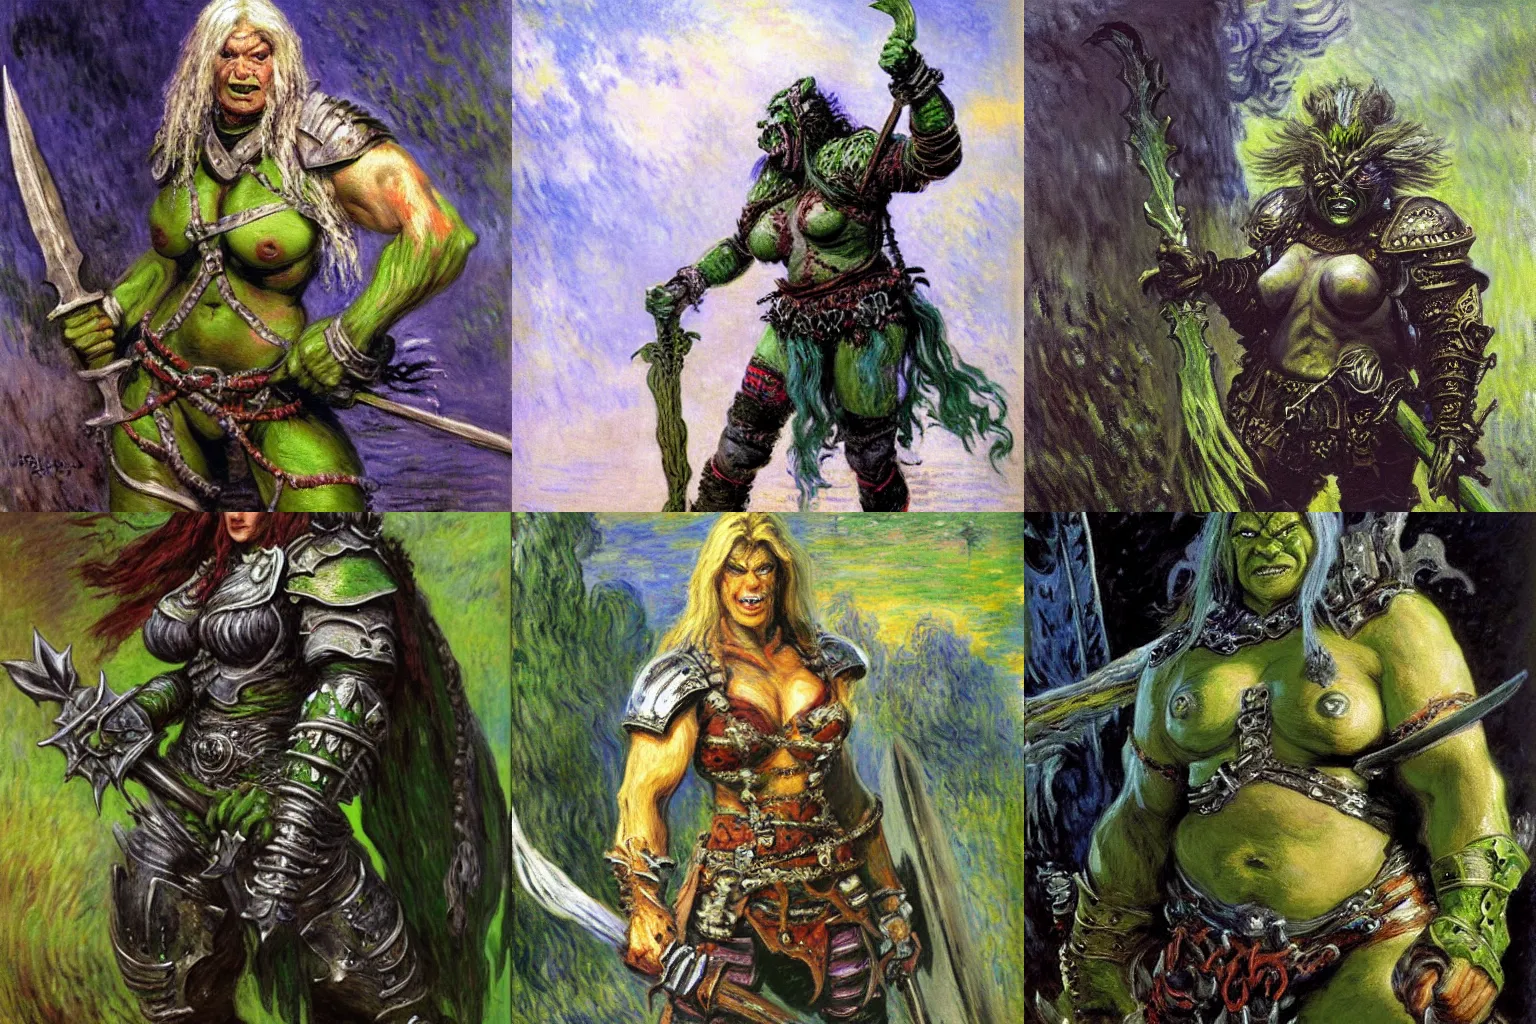 Prompt: A big green orc lady barbarian with heavy-plate-armor. Fierce fantasy artwork by Charles Monet and Greg staples and Kev Walker, oil painting on matte canvas